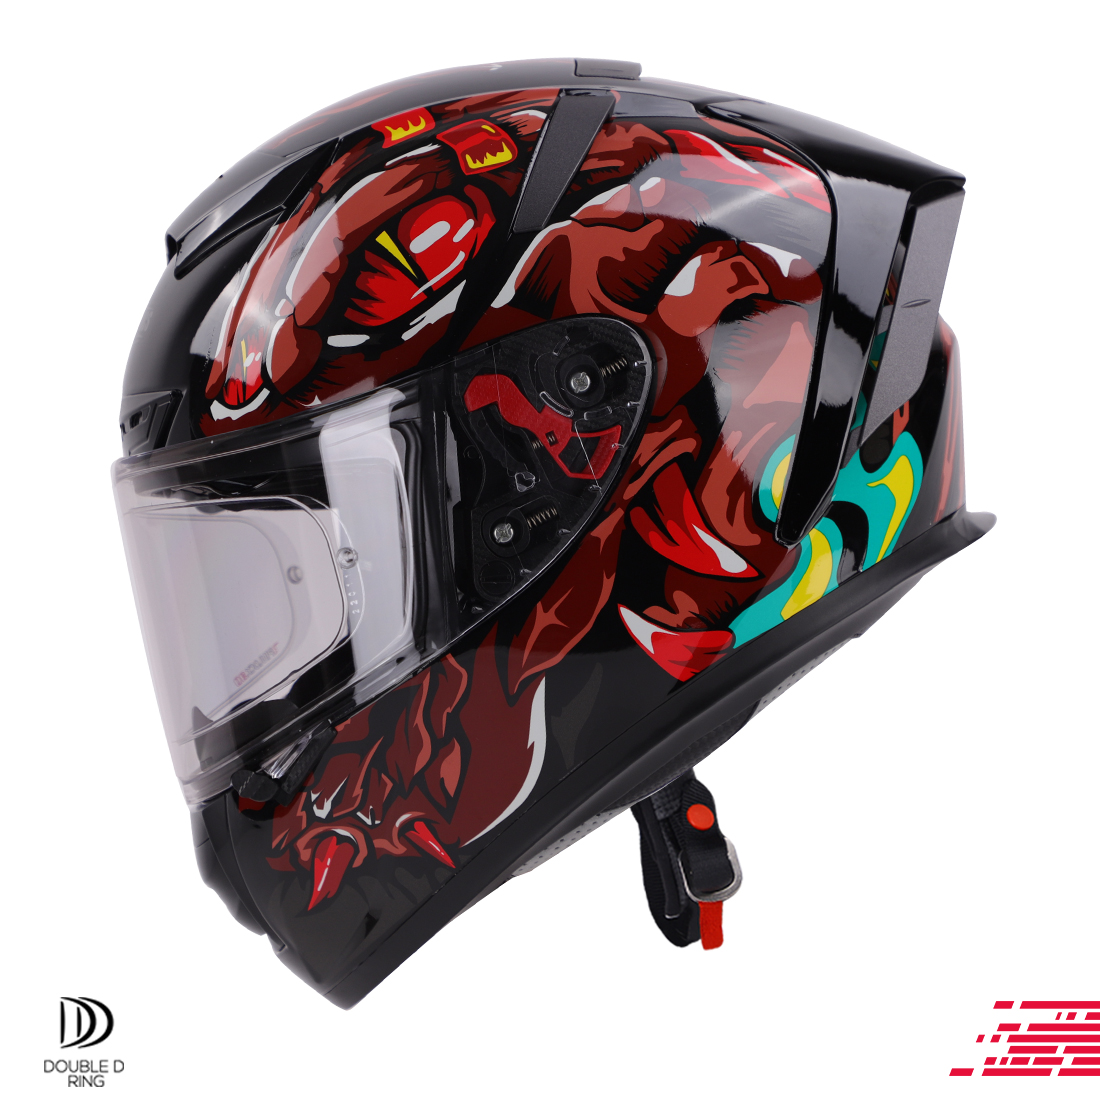 Steelbird SA-5 Monster ISI/DOT Certified Full Face Graphic Helmet With Outer Anti-Fog Clear Visor (Glossy Black Red)